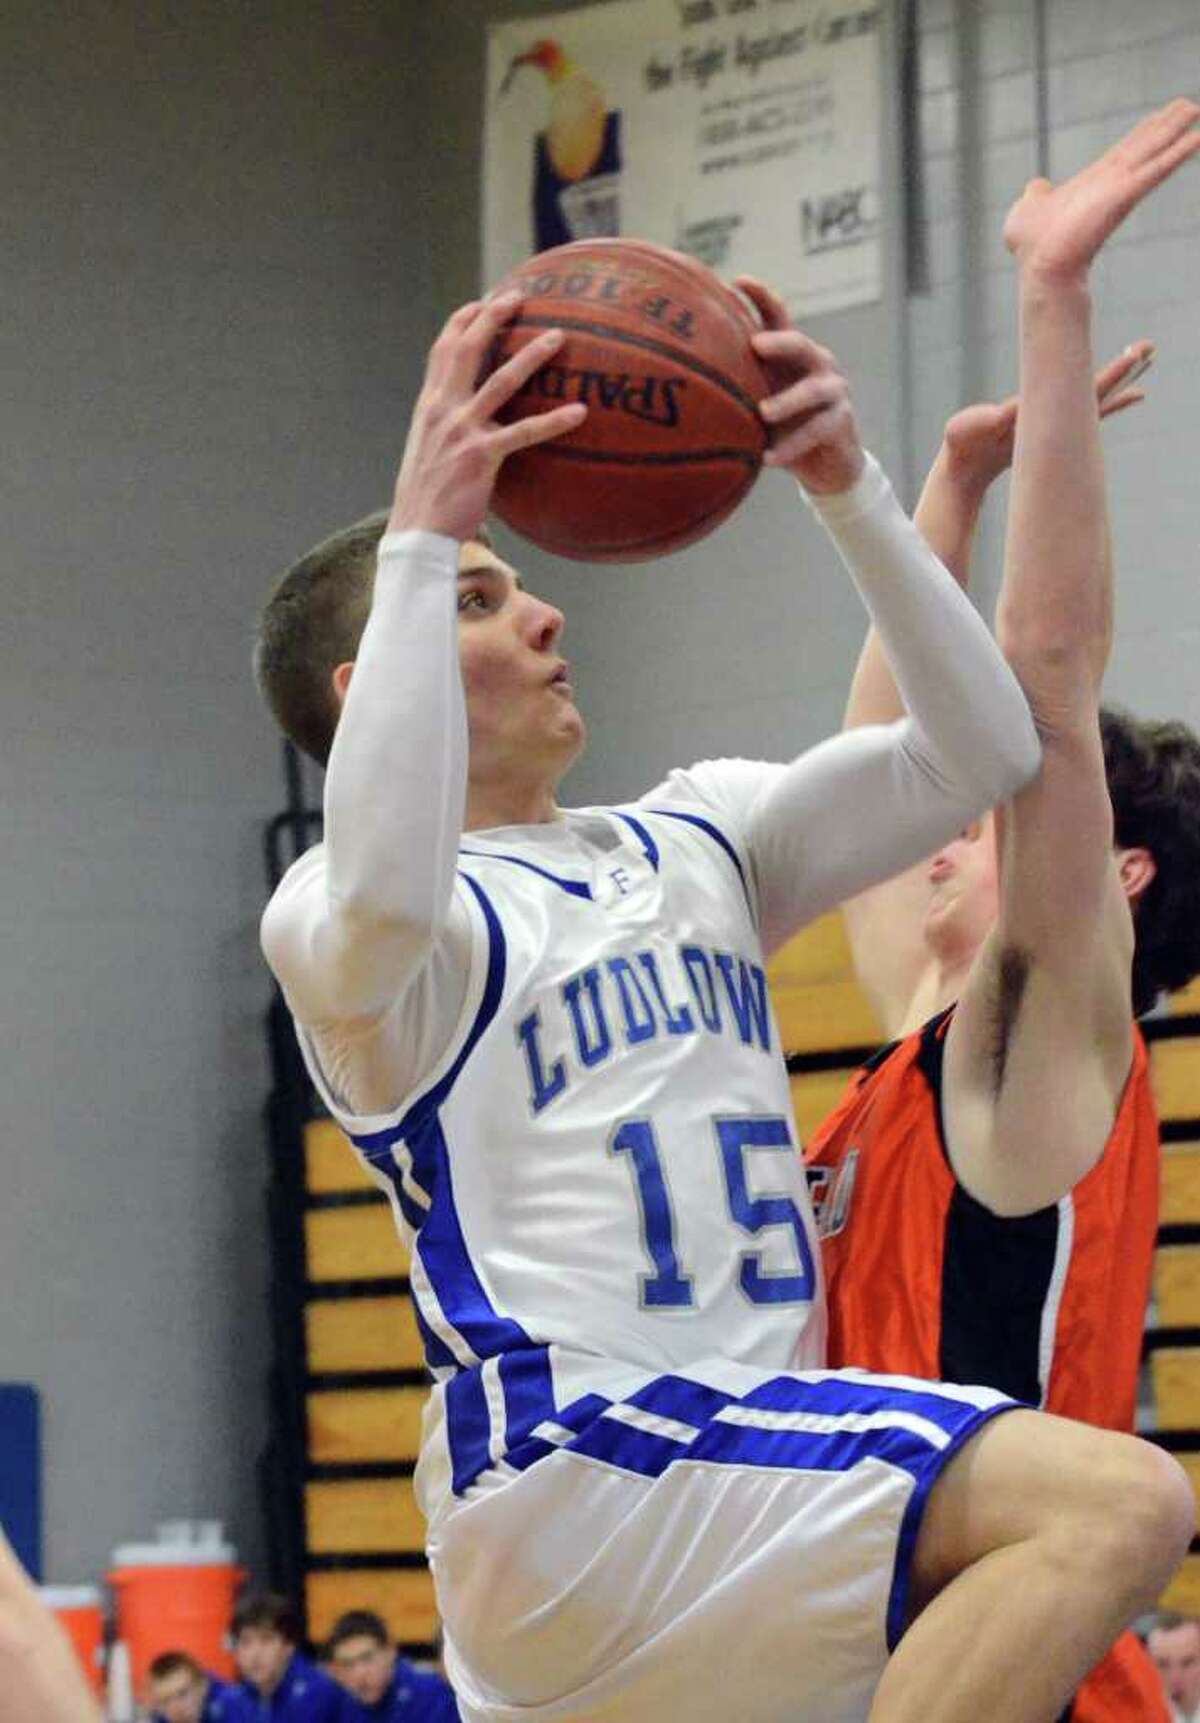 Fairfield Ludlowe's Erik Krumins goes up for a shot against Ridgefield's Seth von Kuhn during the boys basketball game at Ludlowe on Wednesday, Feb. 23, 2011.